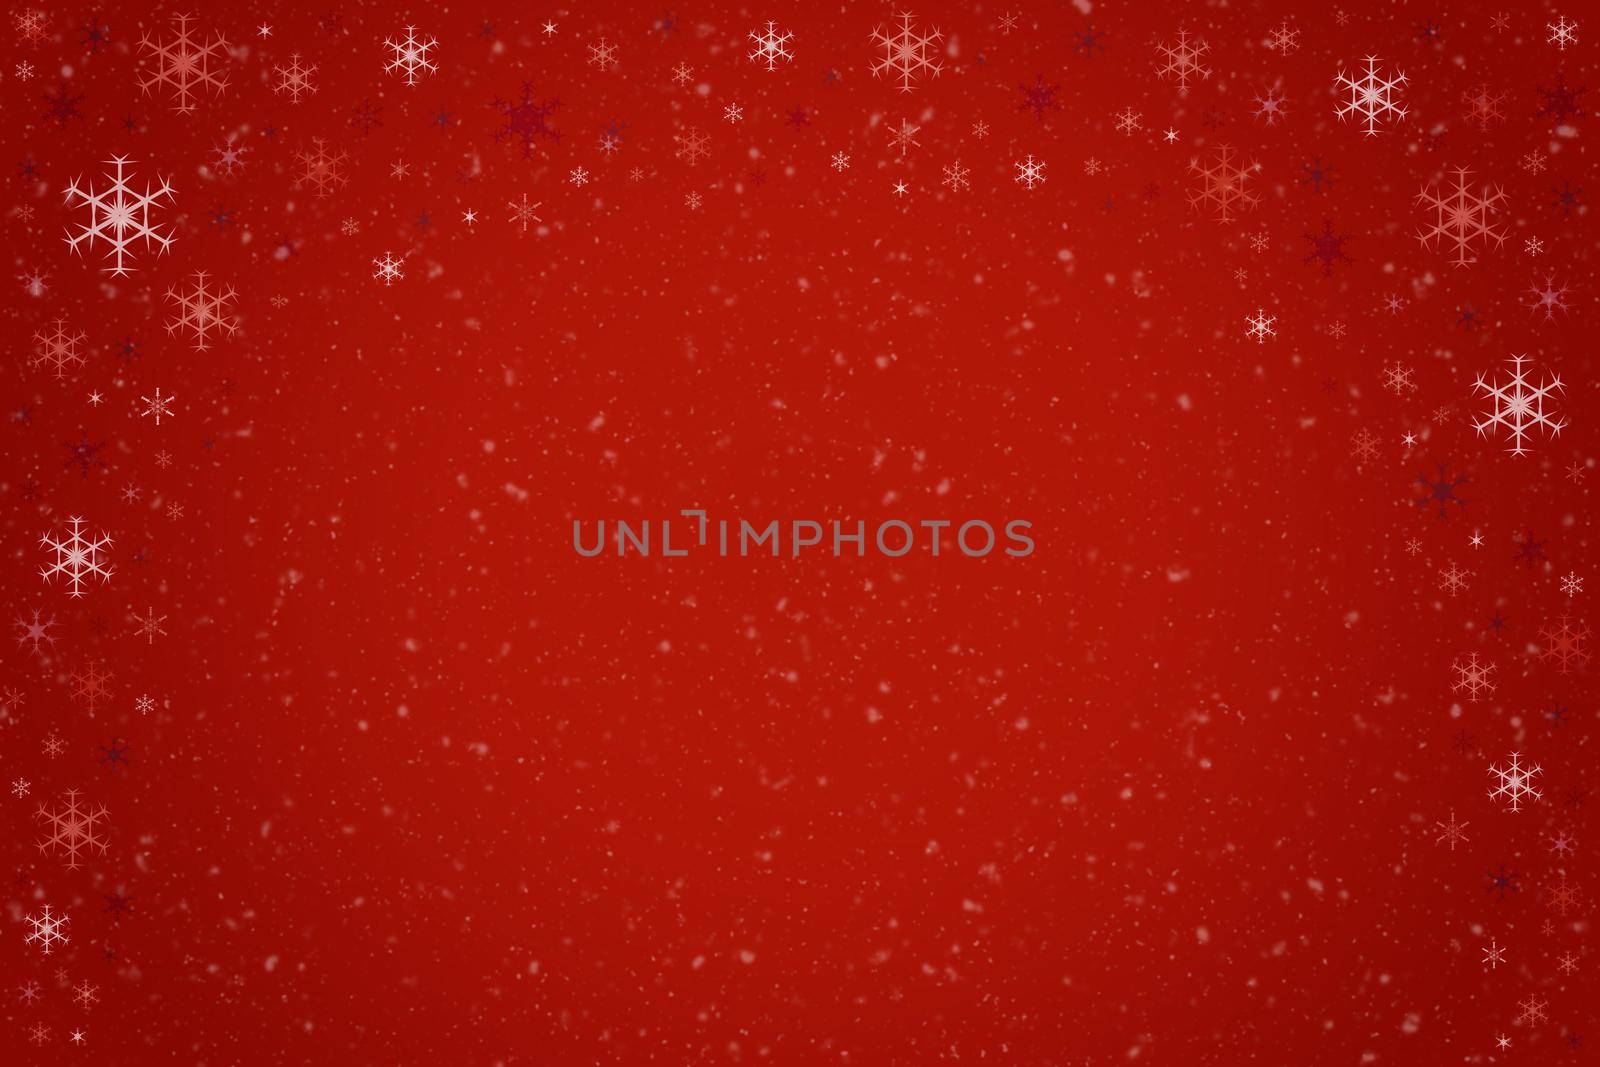 Abstract vivid red Christmas holiday winter background frame of falling snowflakes